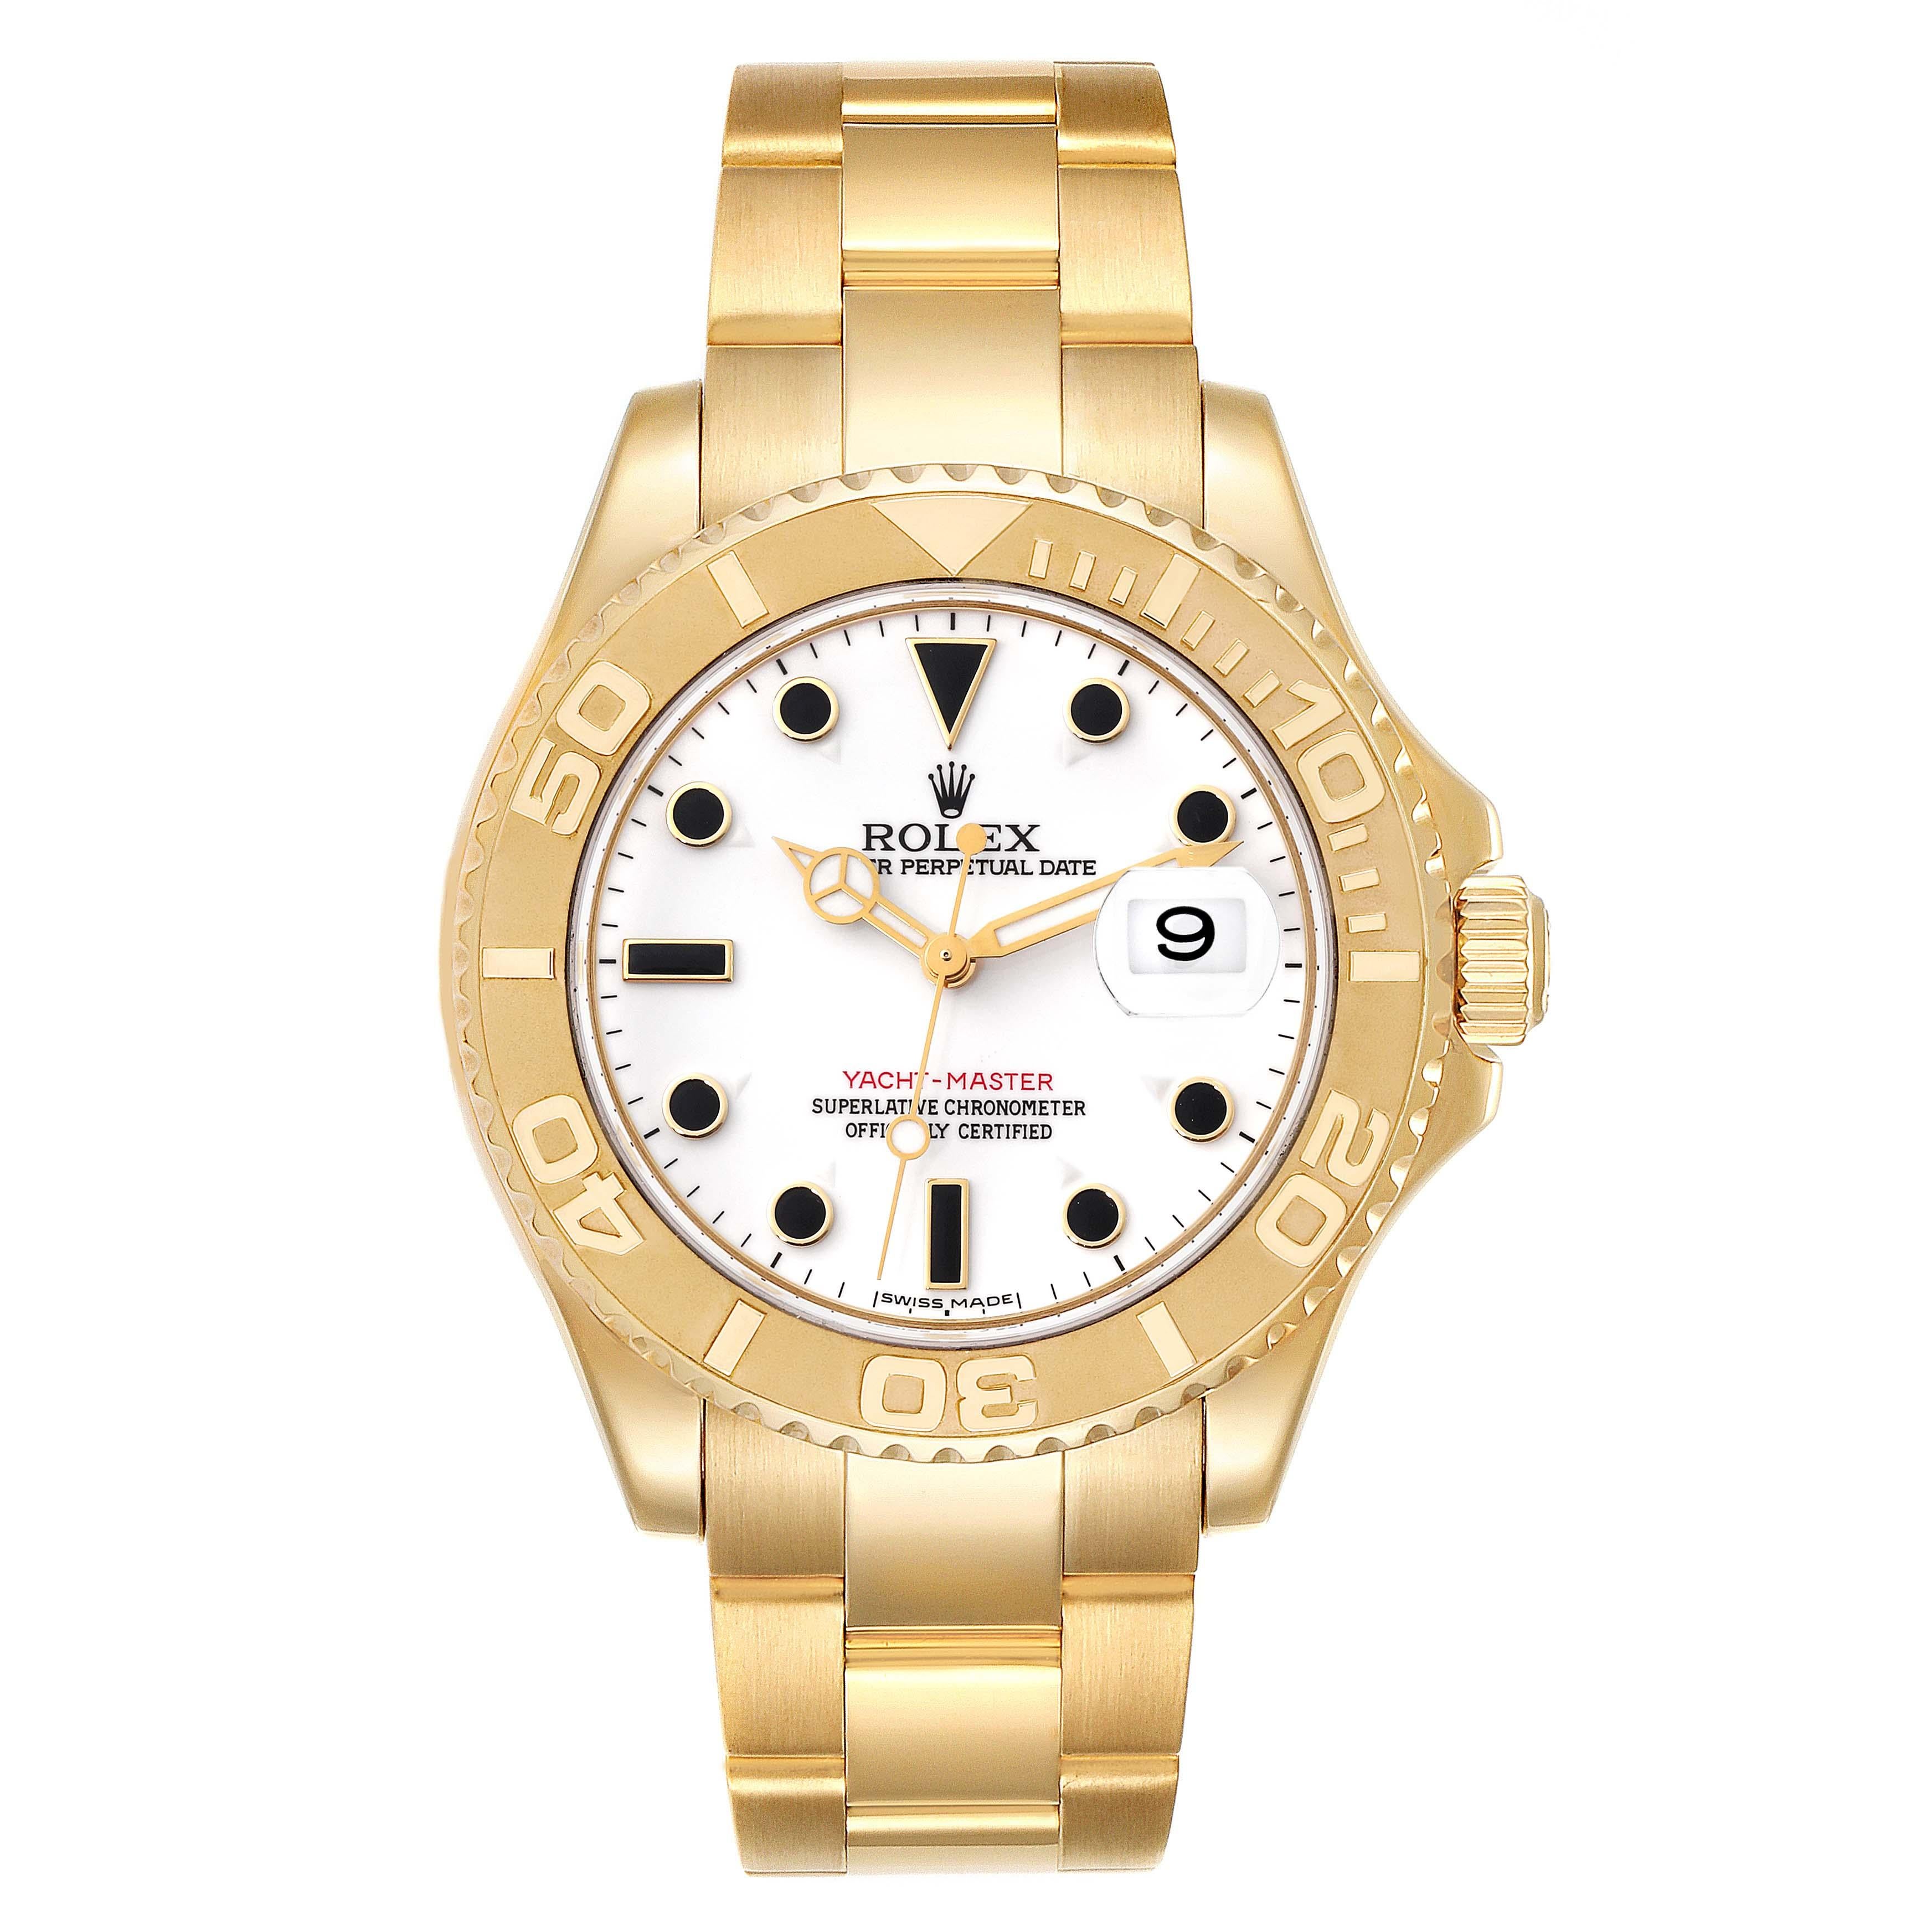 Rolex Yachtmaster 40mm Yellow Gold White Dial Mens Watch 16628 Box Papers. Officially certified chronometer automatic self-winding movement. Rhodium-plated, oeil-de-perdrix decoration, straight-line lever escapement, freesprung monometallic balance